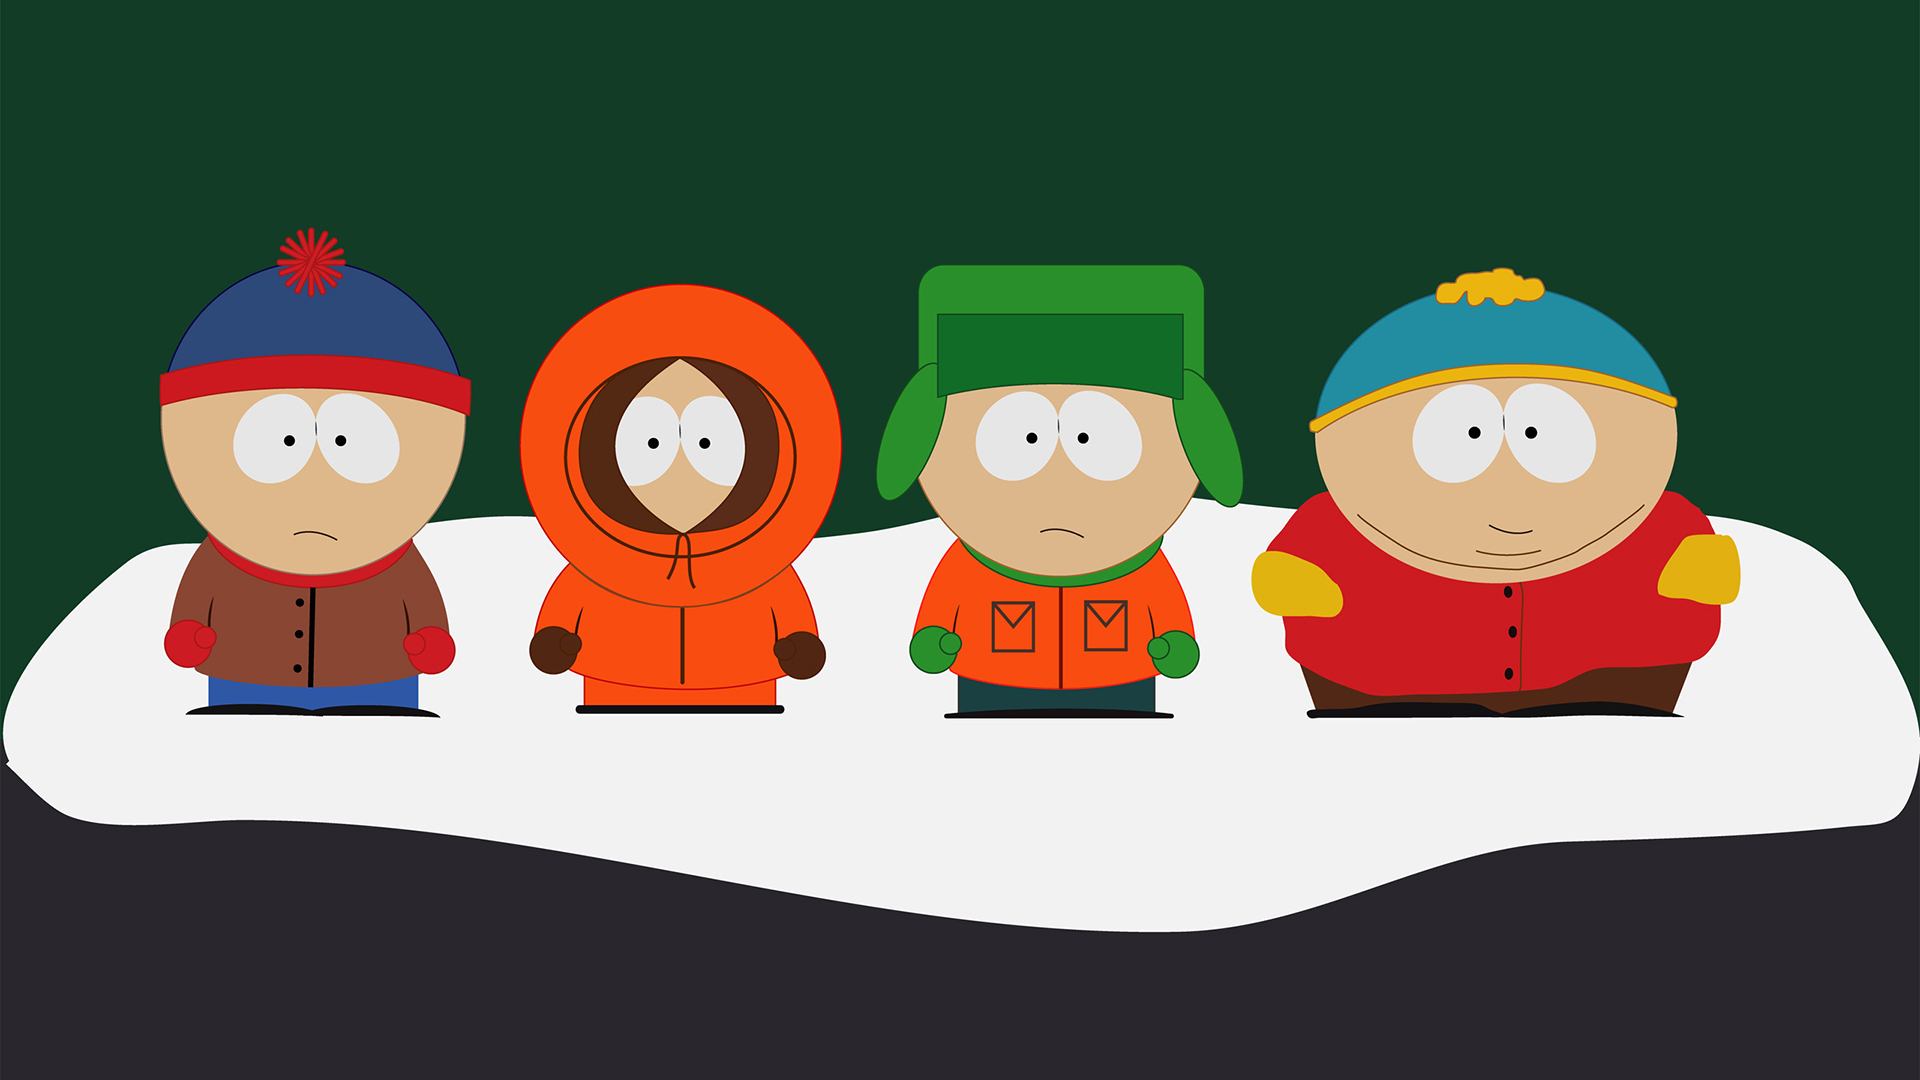 View, Download, Rate, and Comment on this South Park Art. 